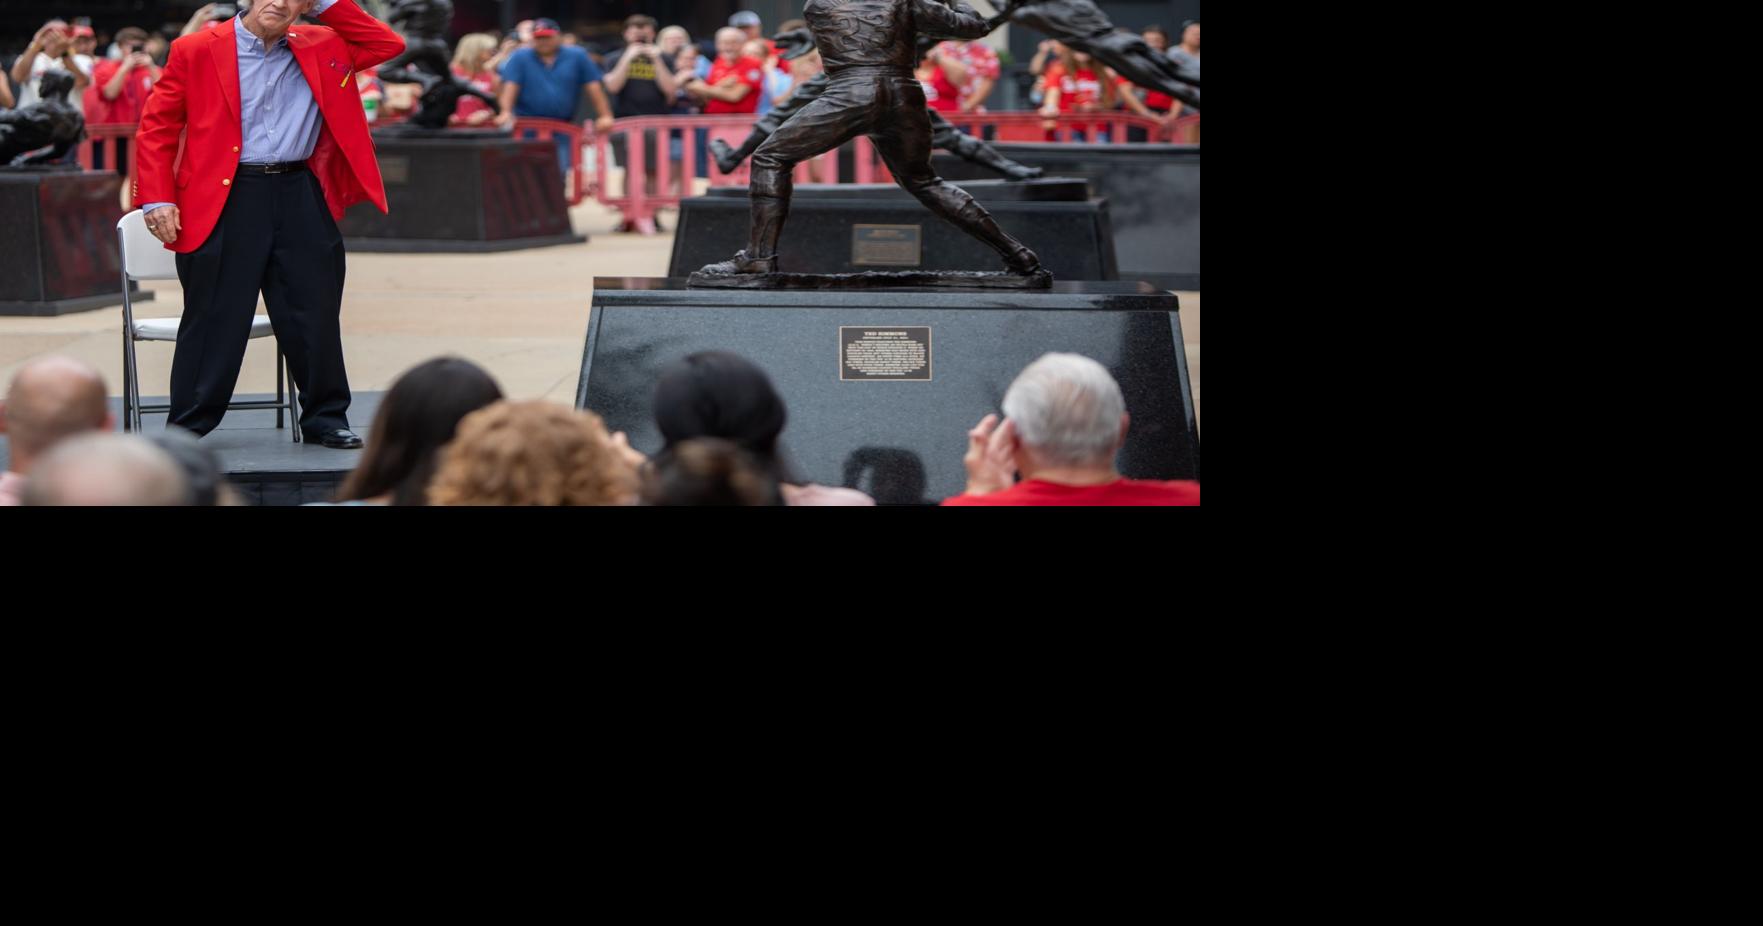 Photos: Ted Simmons statue unveiled before induction into Hall of Fame